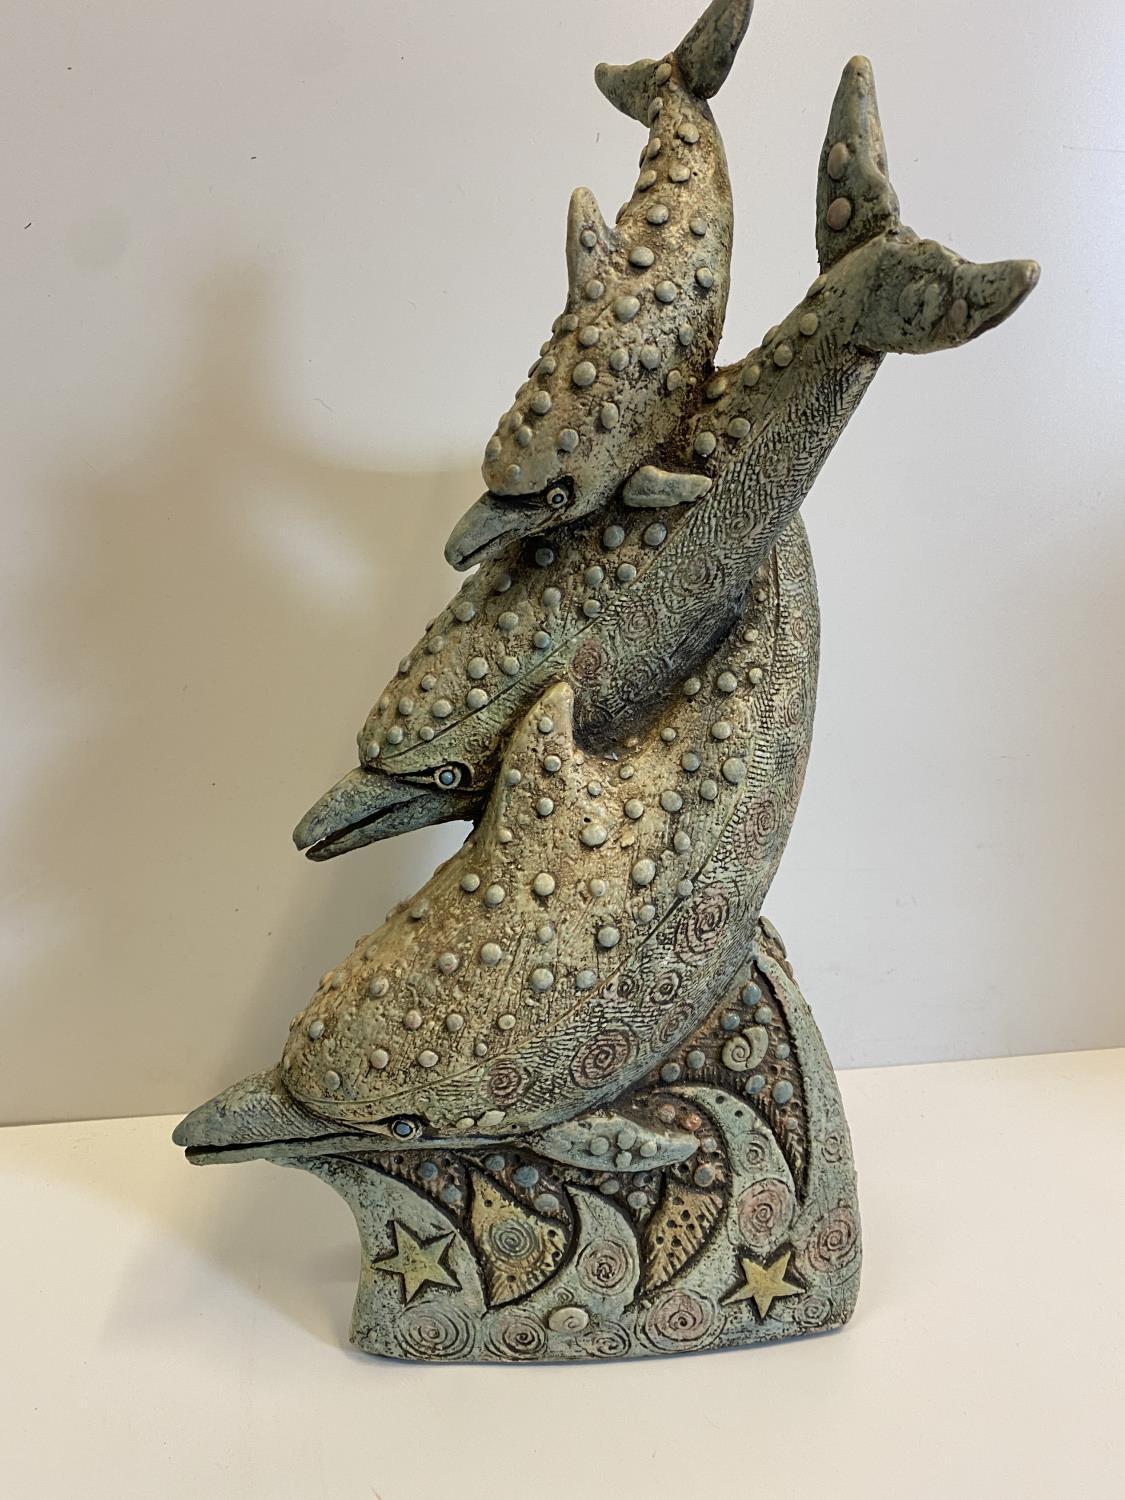 A stylish resin statue of 3 diving dolphins, 40cm tall